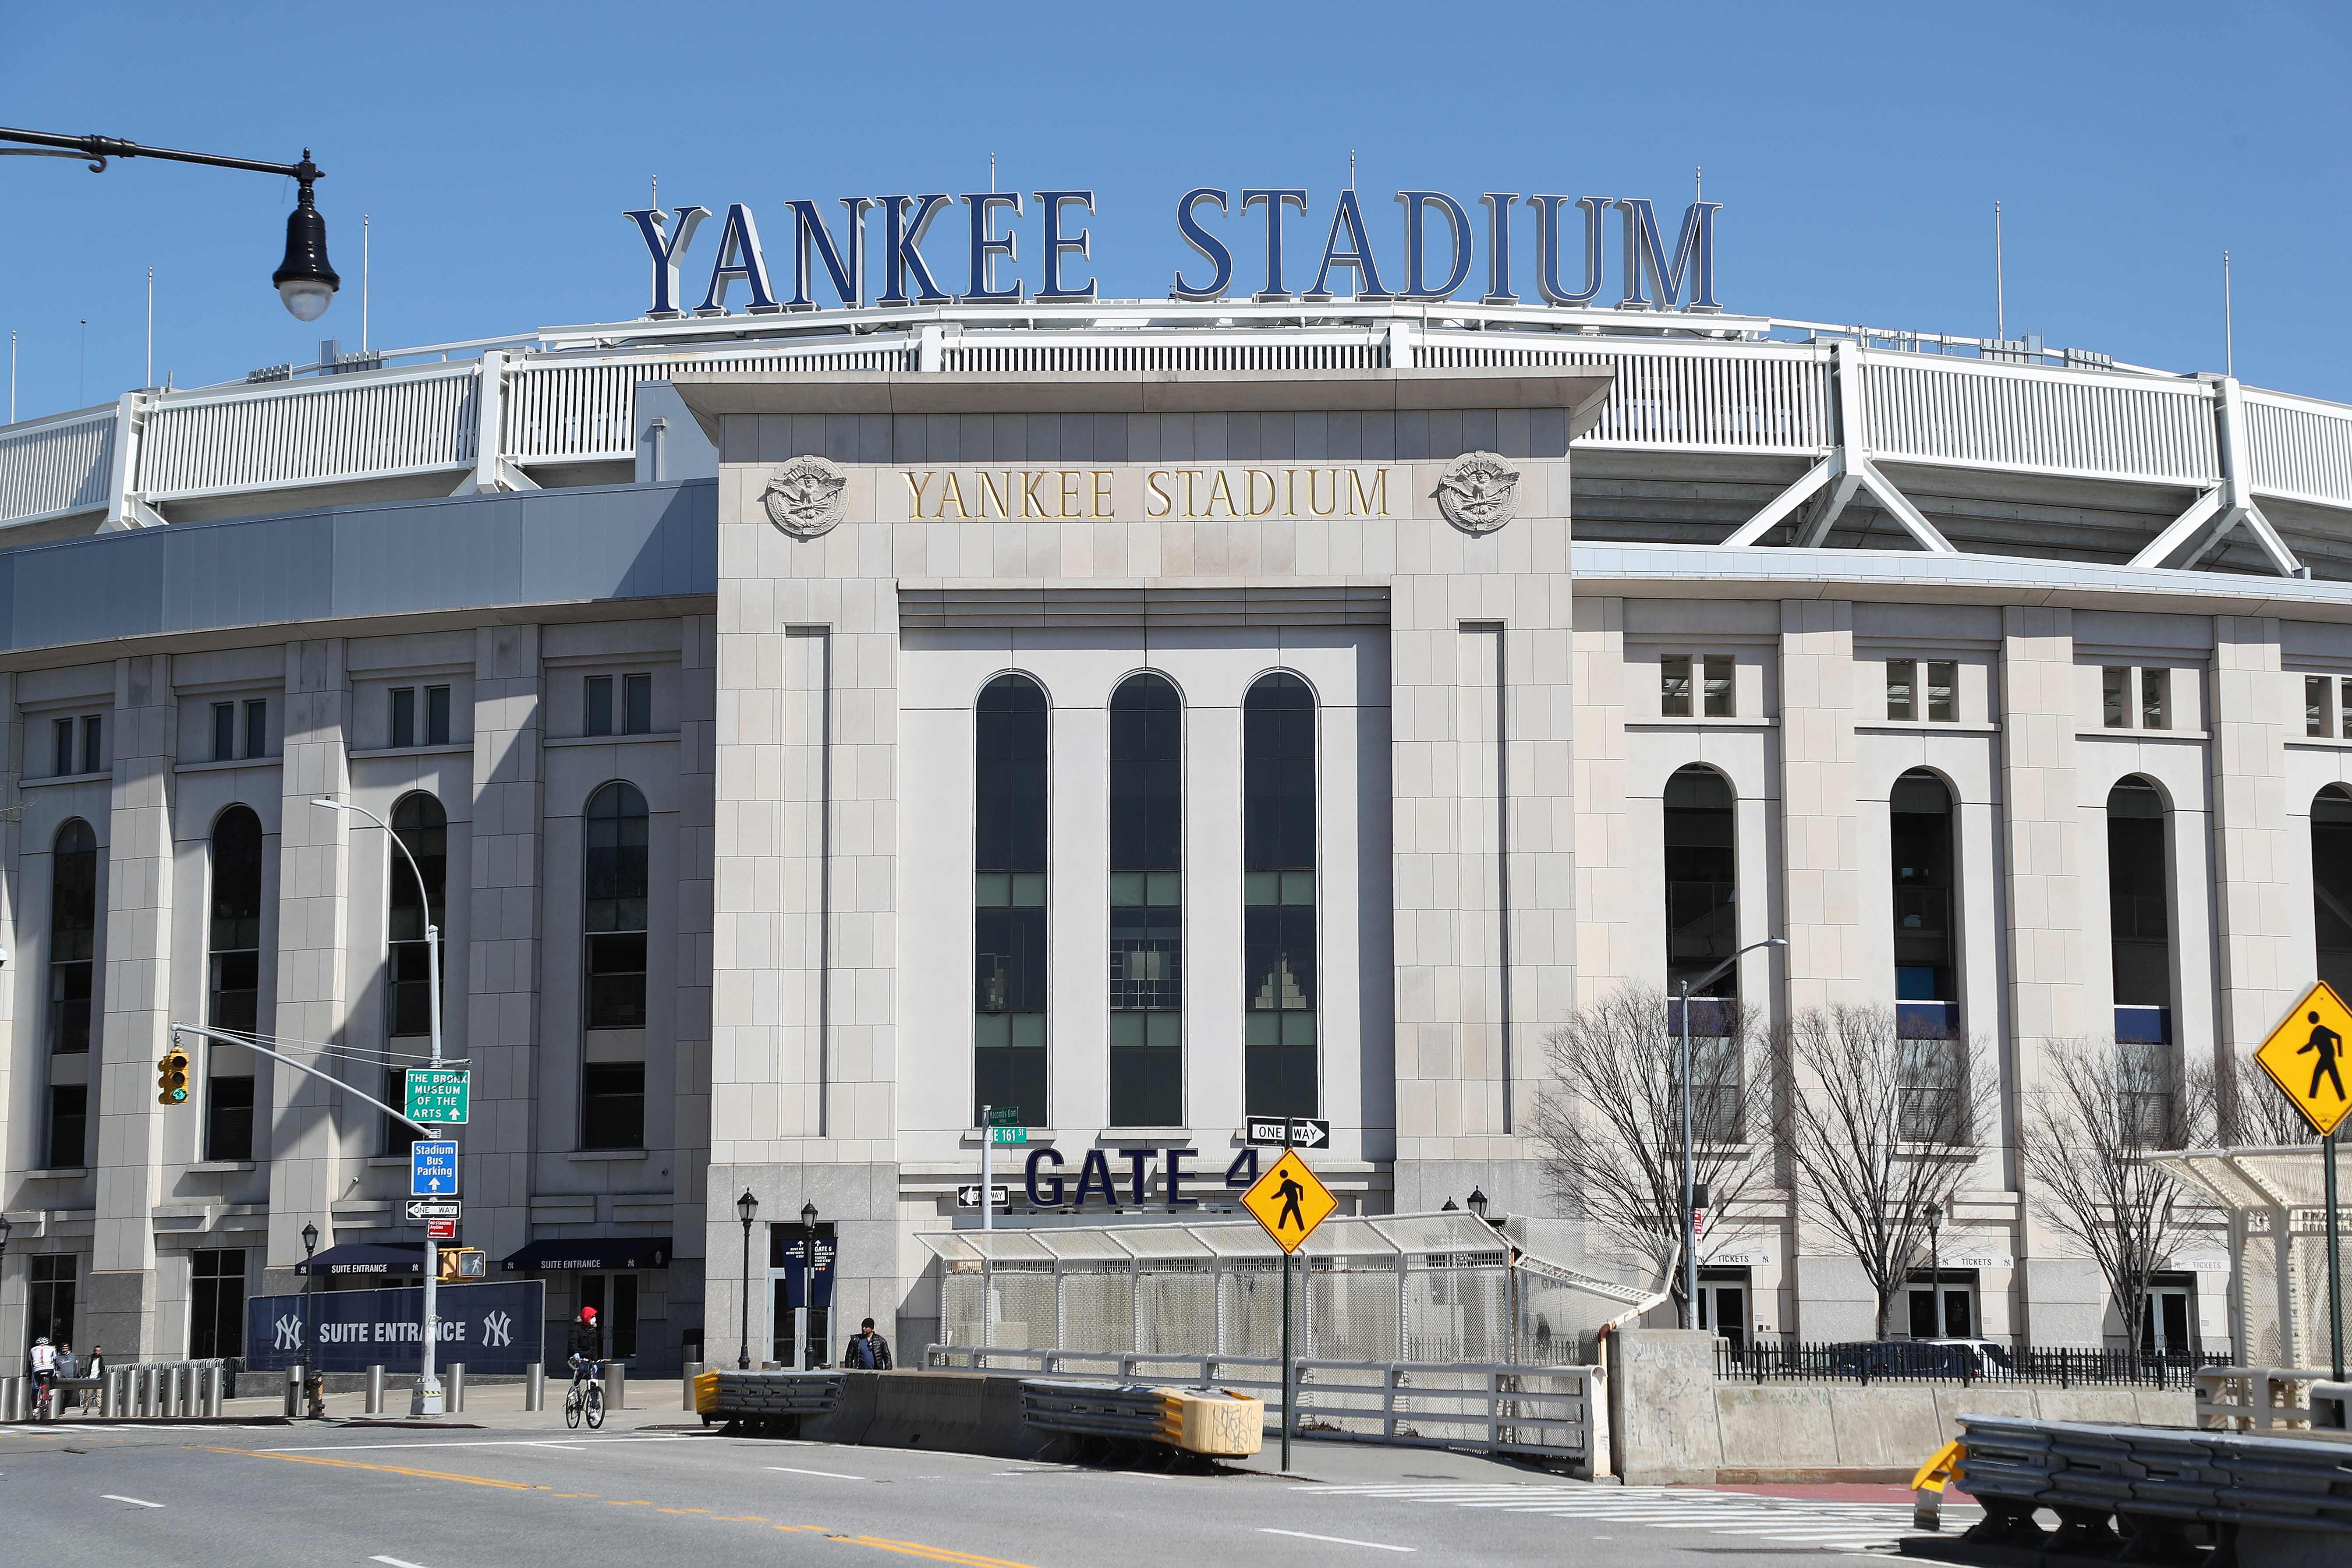 This file photo shows Yankee Stadium empty on the scheduled date for Opening Day March 26, 2020 in the Bronx, New York. (AFP)